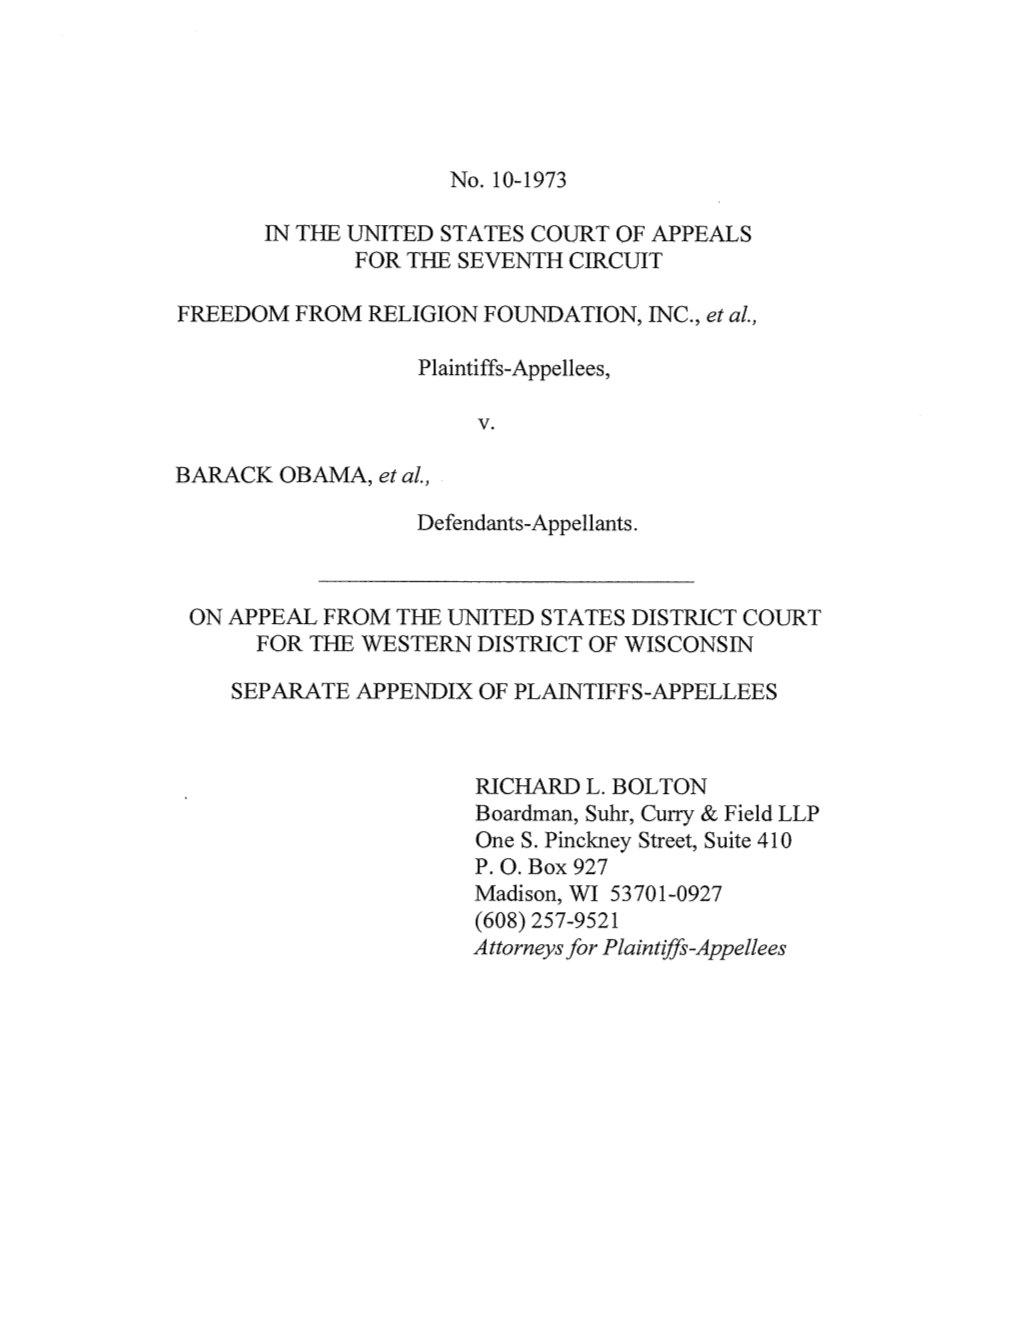 No. 10-1973 in the UNITED STATES COURT of APPEALS for THE